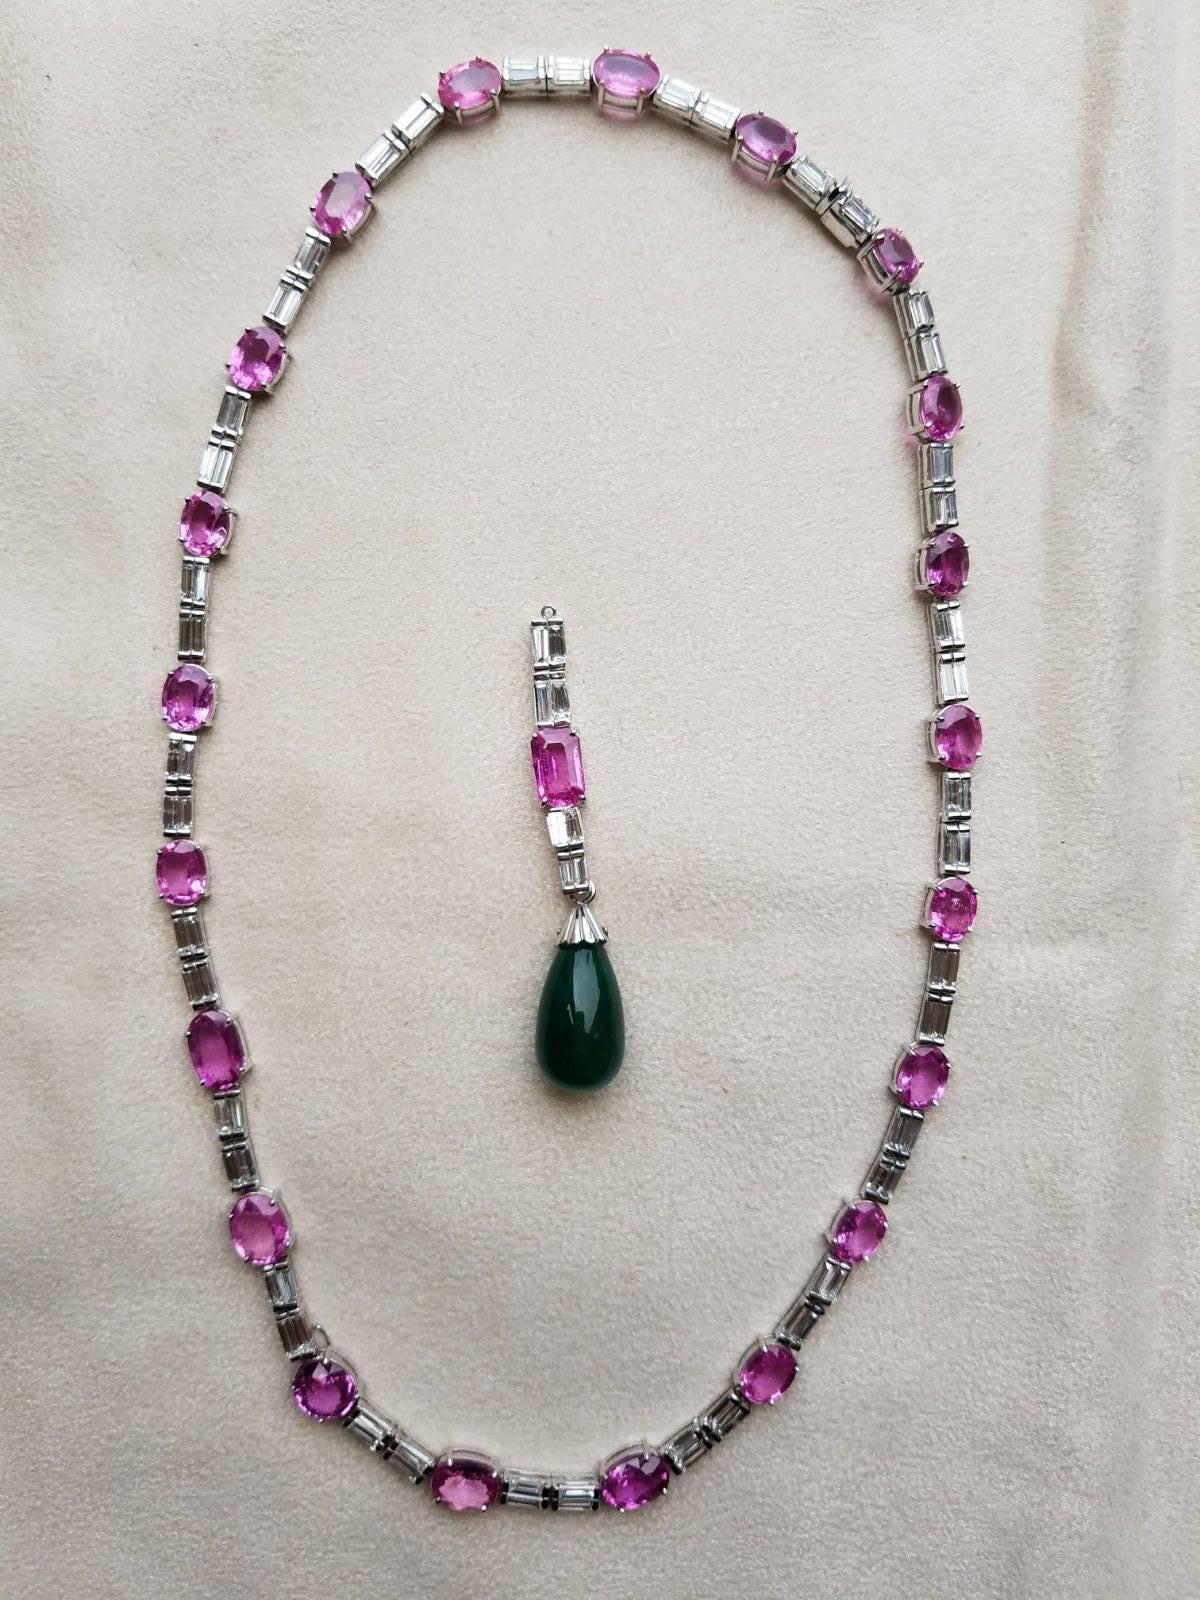 A classic Pink Sapphire and Diamond baguette necklace, with a detachable hanging Emerald drop locket - all set in 18K white gold. 

Stone Details:
Pink Sapphire - 34.96 carats
Zambian Emerald Drop - 17.22 carats
Diamond - 8.8 carats , VS/H,I

The